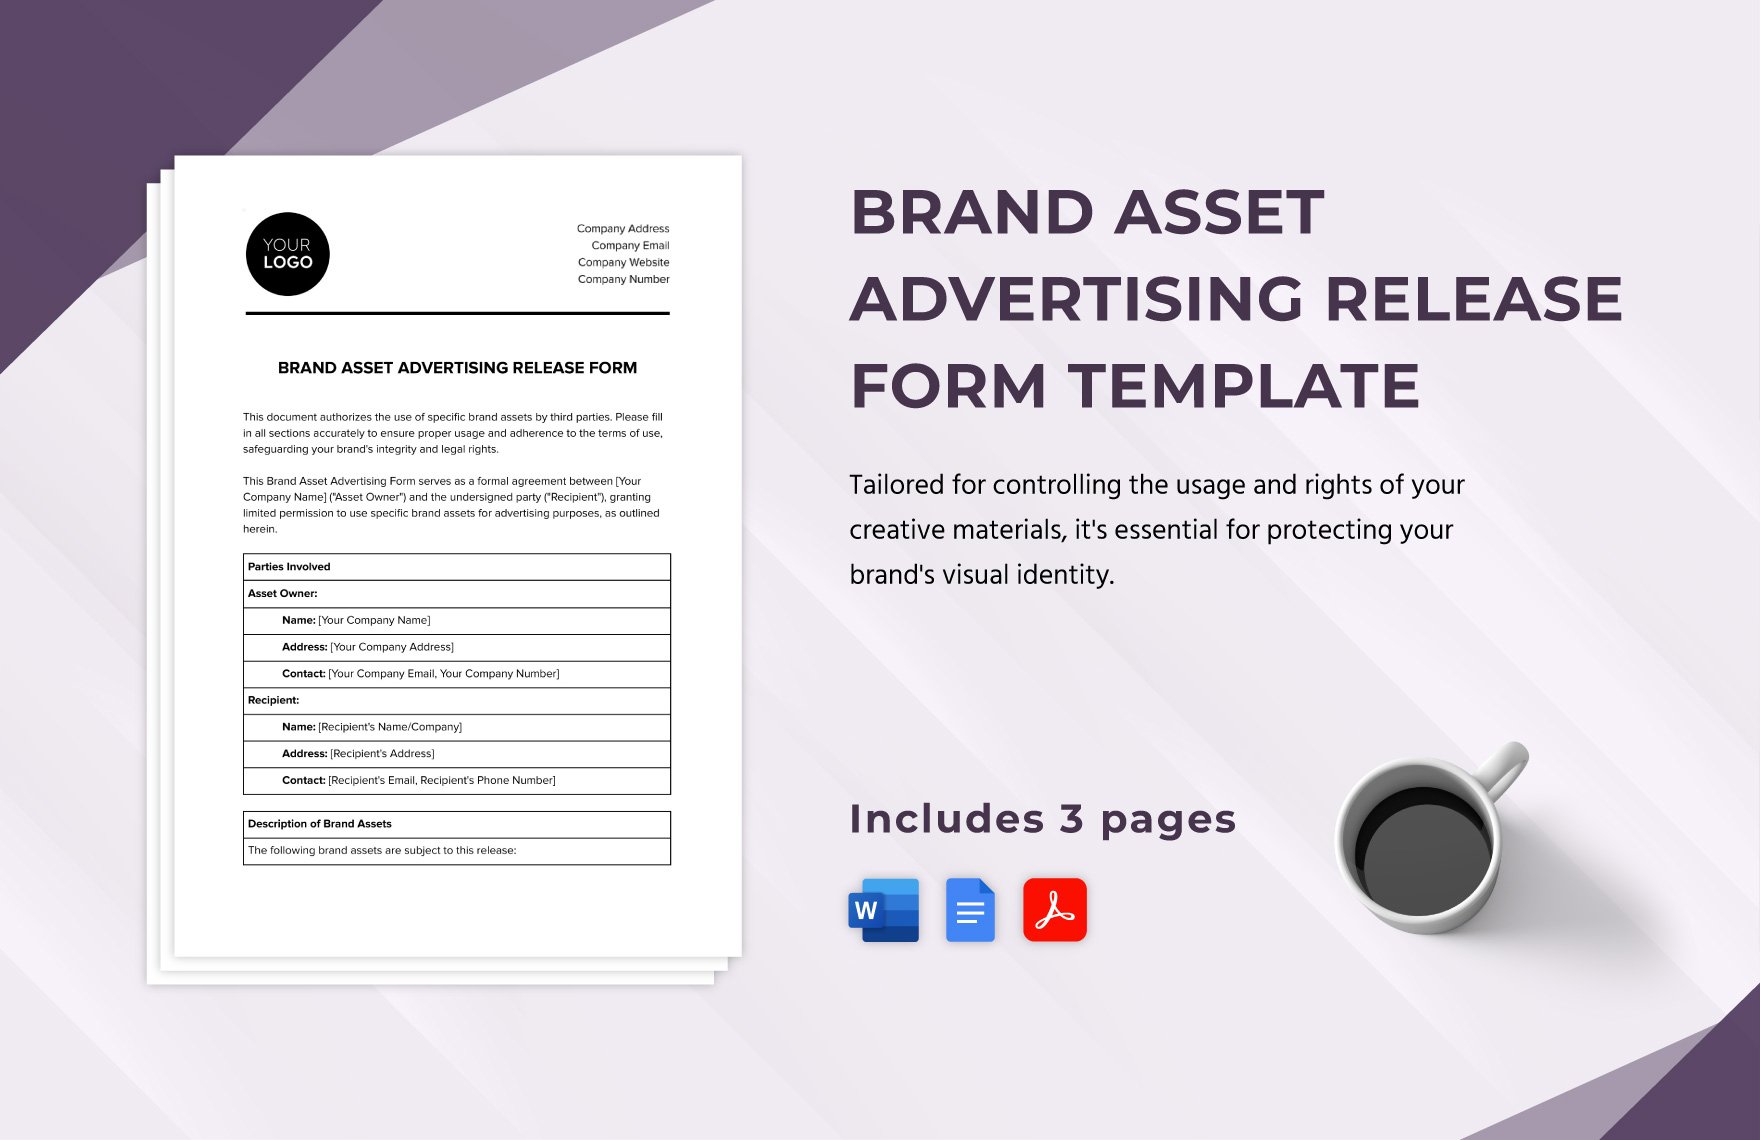 Brand Asset Advertising Release Form Template in Word, Google Docs, PDF